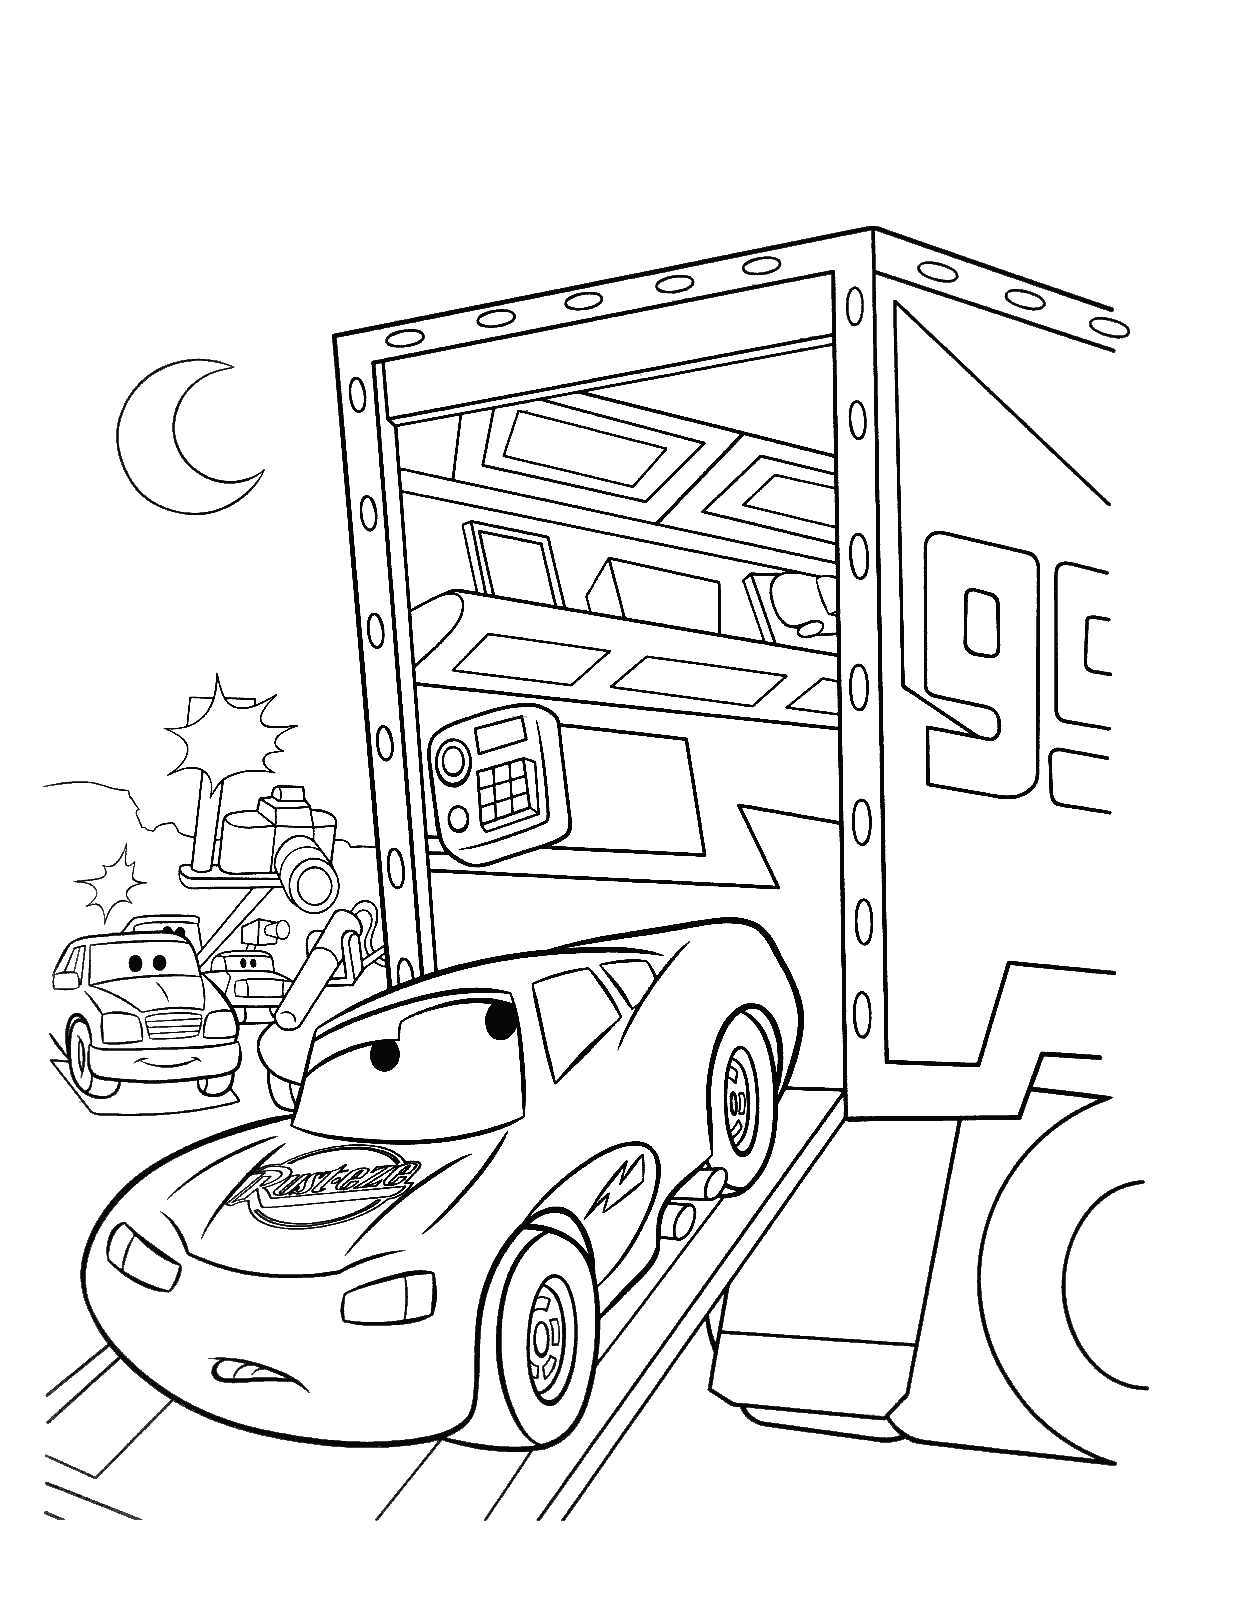 cars-coloring-pages-to-download-cars-kids-coloring-pages